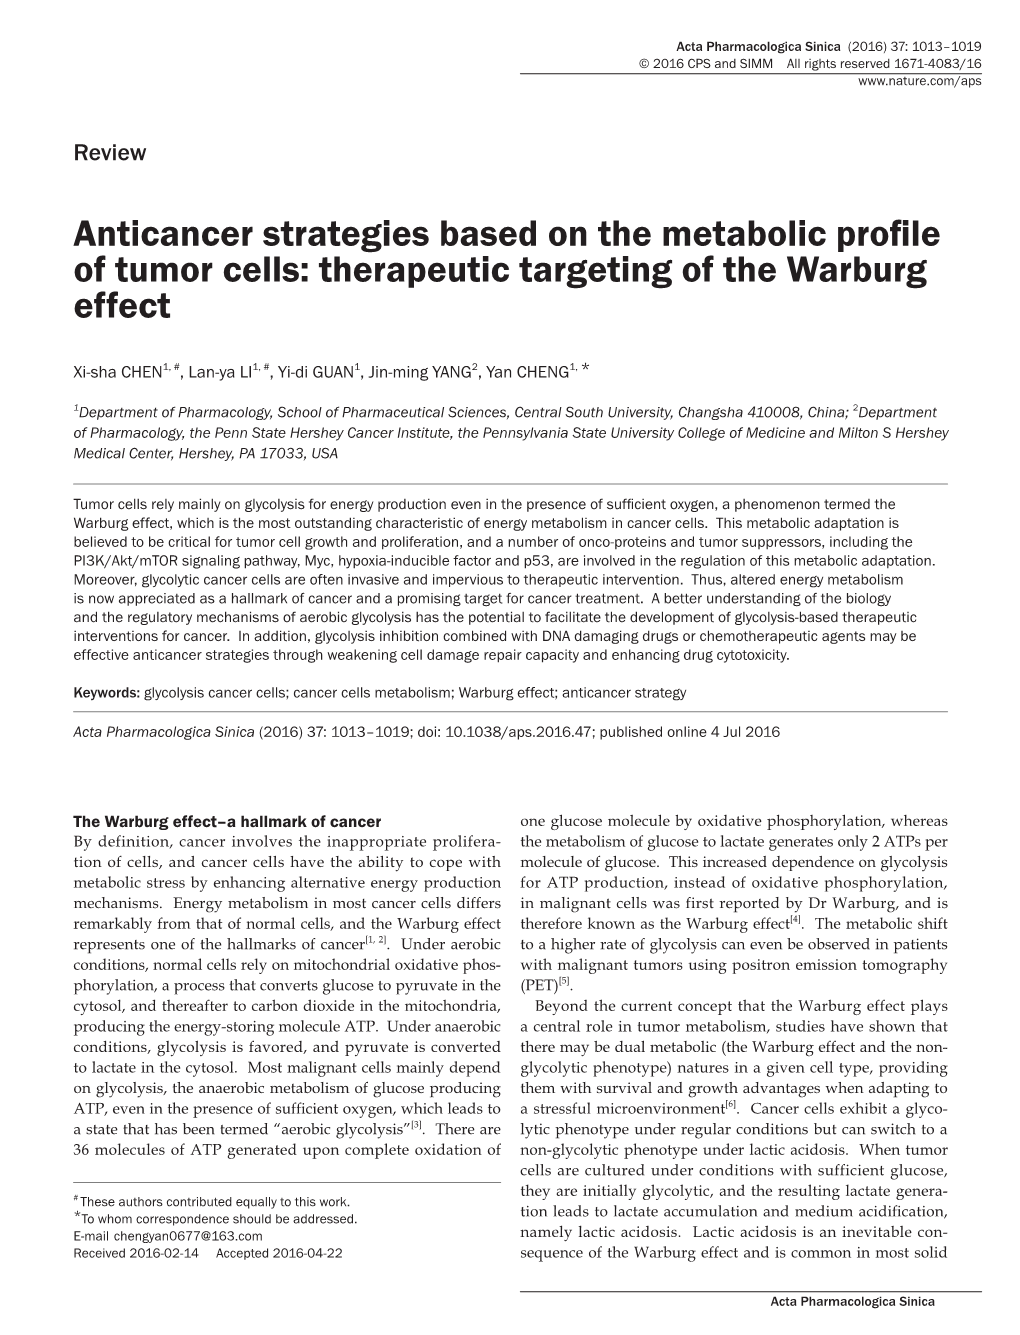 Anticancer Strategies Based on the Metabolic Profile of Tumor Cells: Therapeutic Targeting of the Warburg Effect